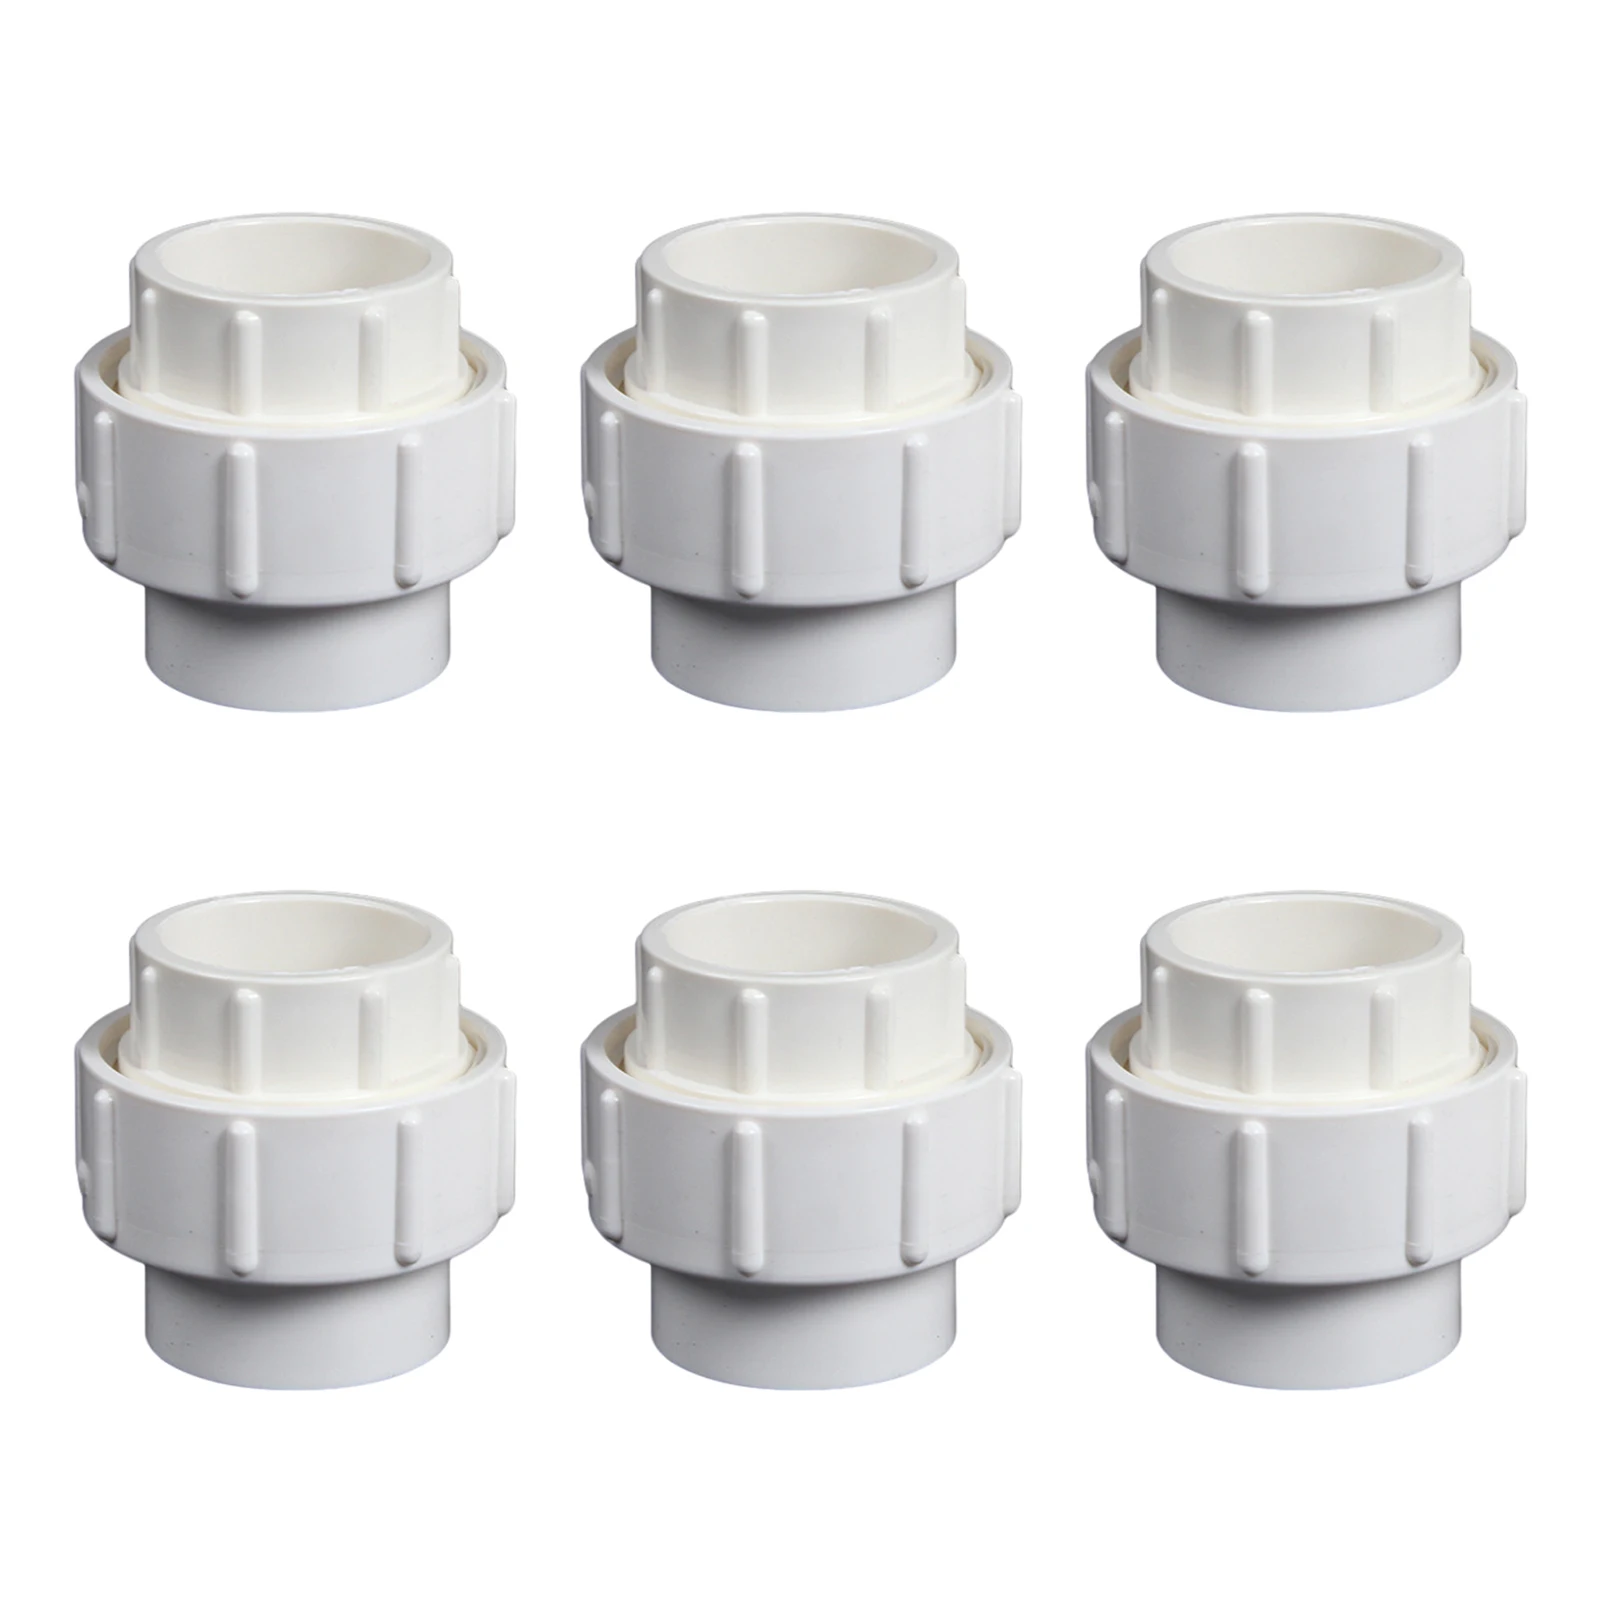 

6pcs Socket Outdoor Applications Port Coupling Pipe Fitting Sturdy PVC Adapter Garden Slip Union Connection Plumbing Convenient